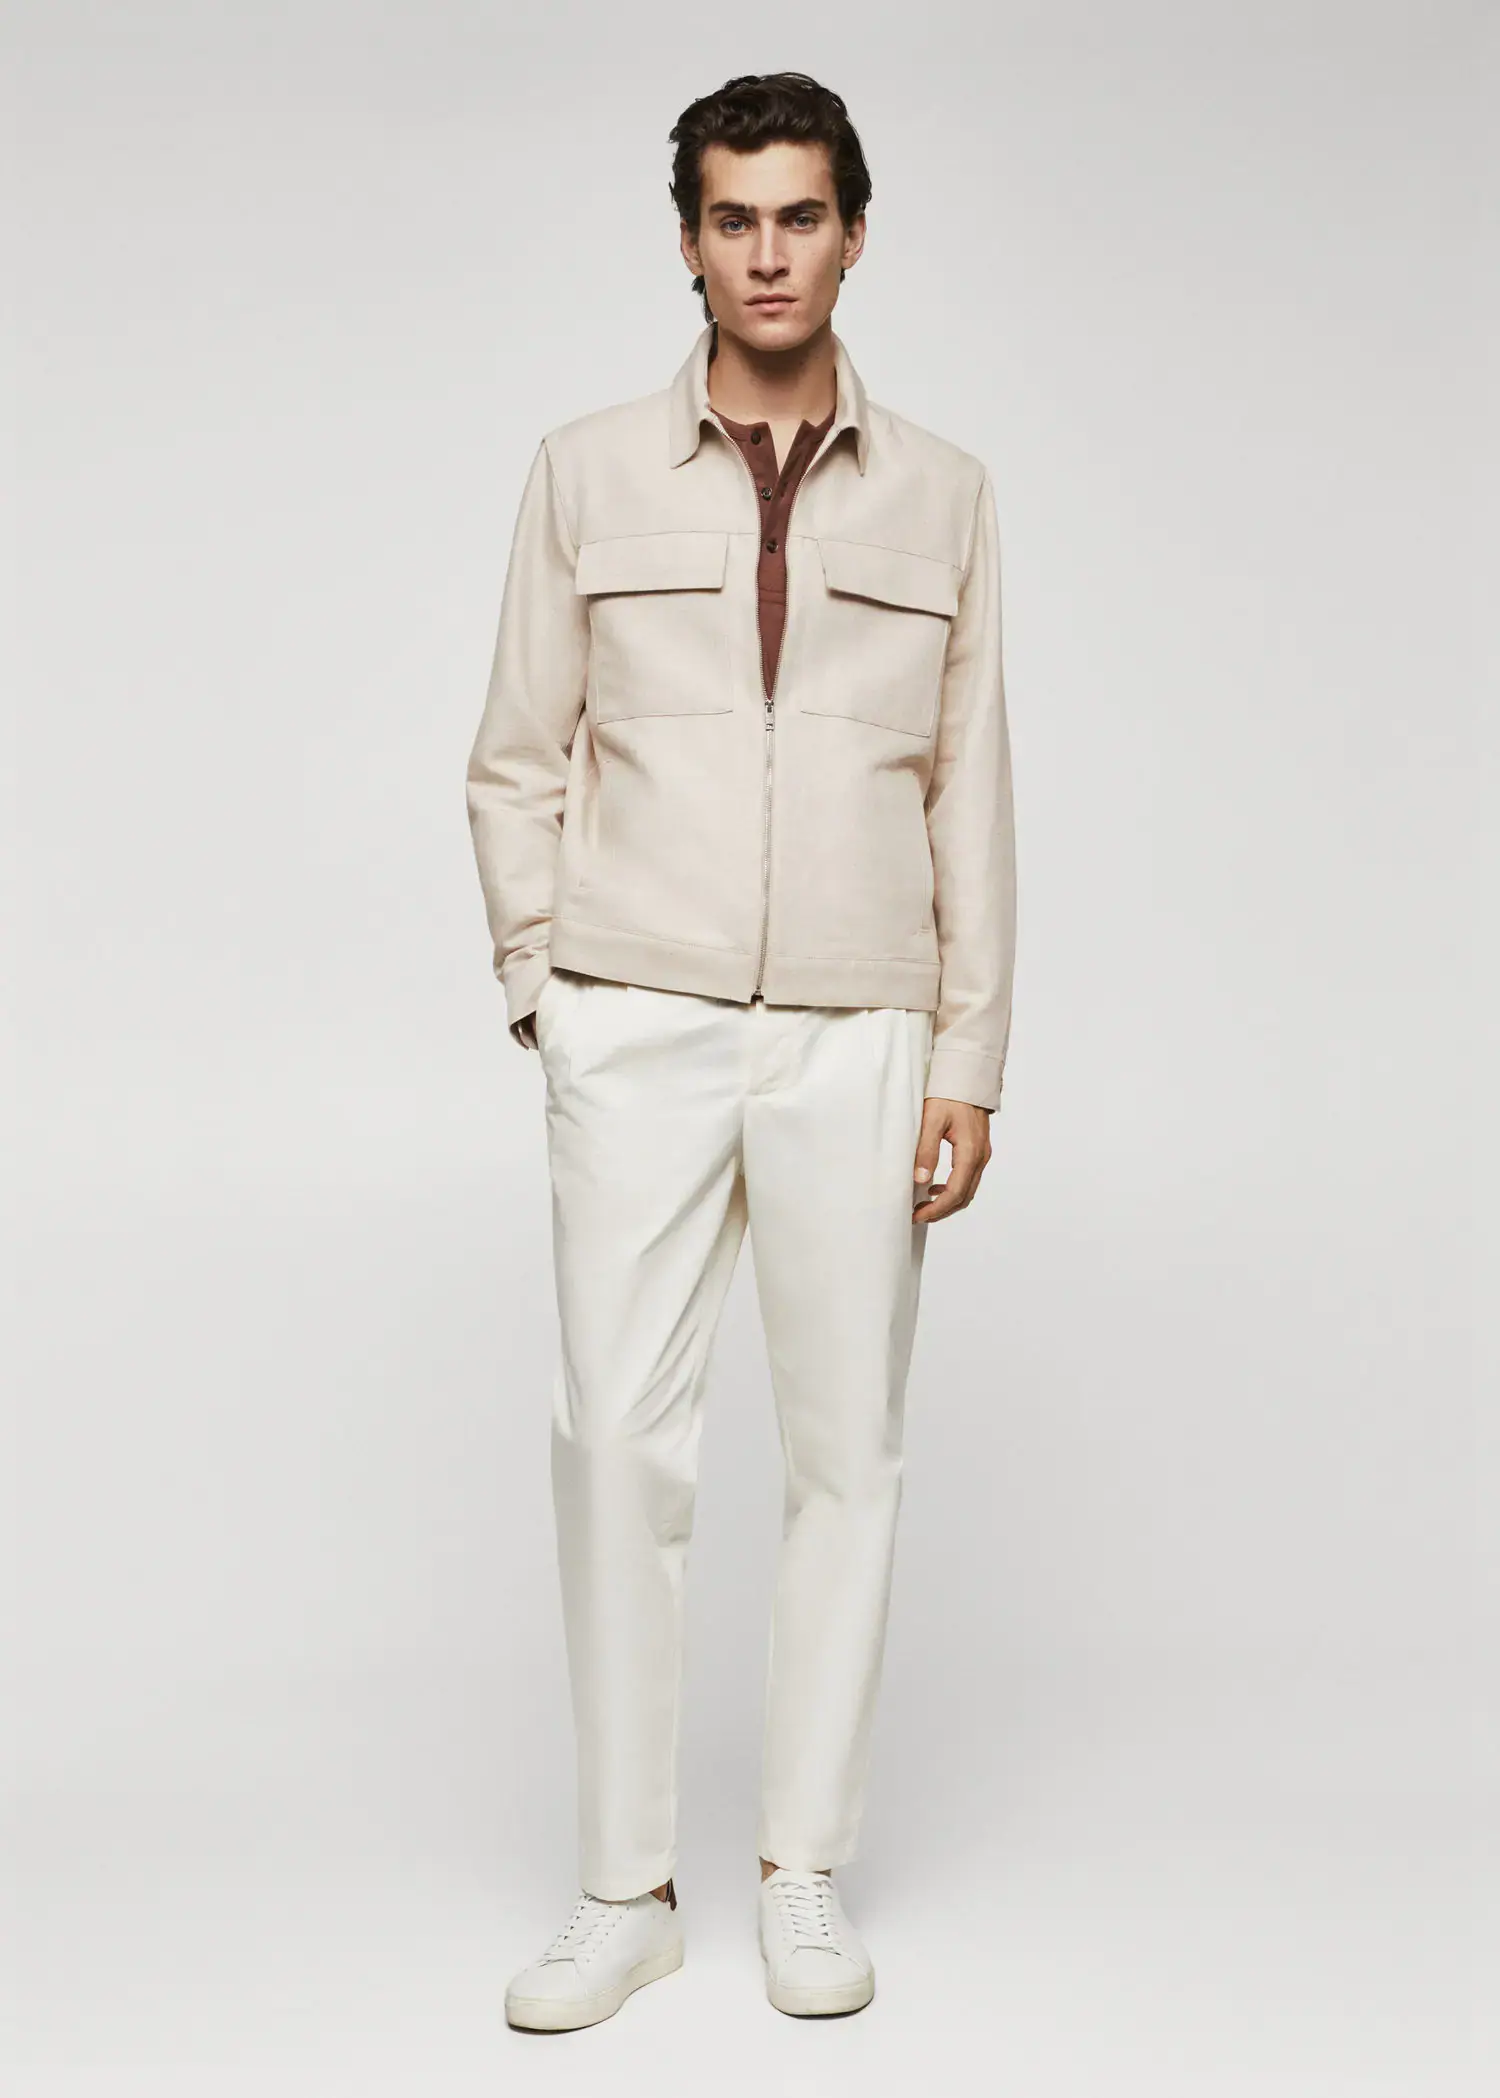 Mango Pocket linen-blend jacket. a man in a white suit standing in front of a wall. 